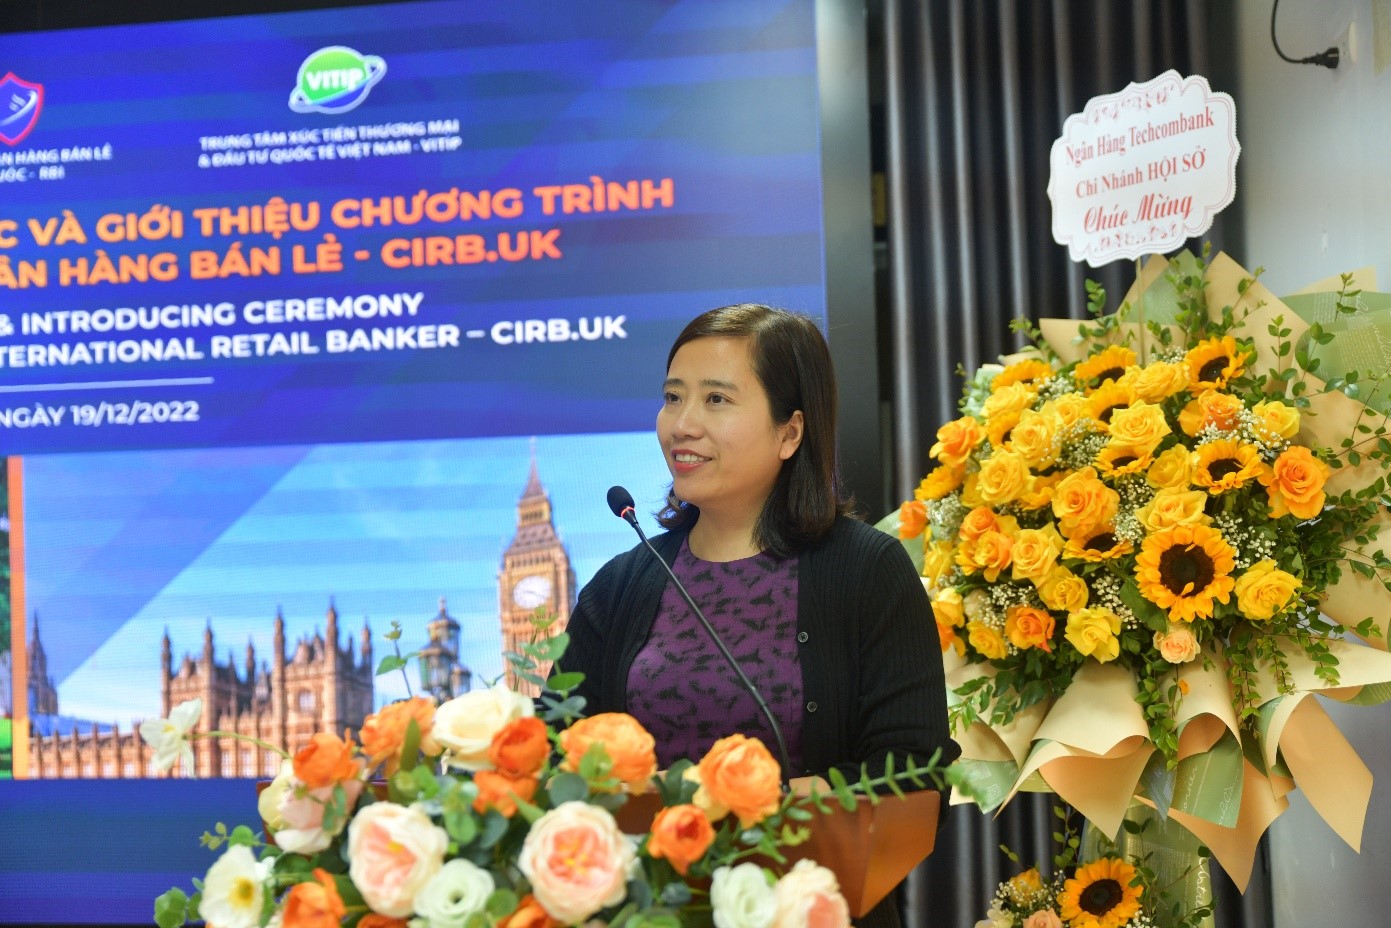 Trần Thị Thanh Tú, a banking expert, former Dean of Banking and Finance Faculty, University of Economics & Business, VNU (UEB), Head of Investment Promotion Department, VNU